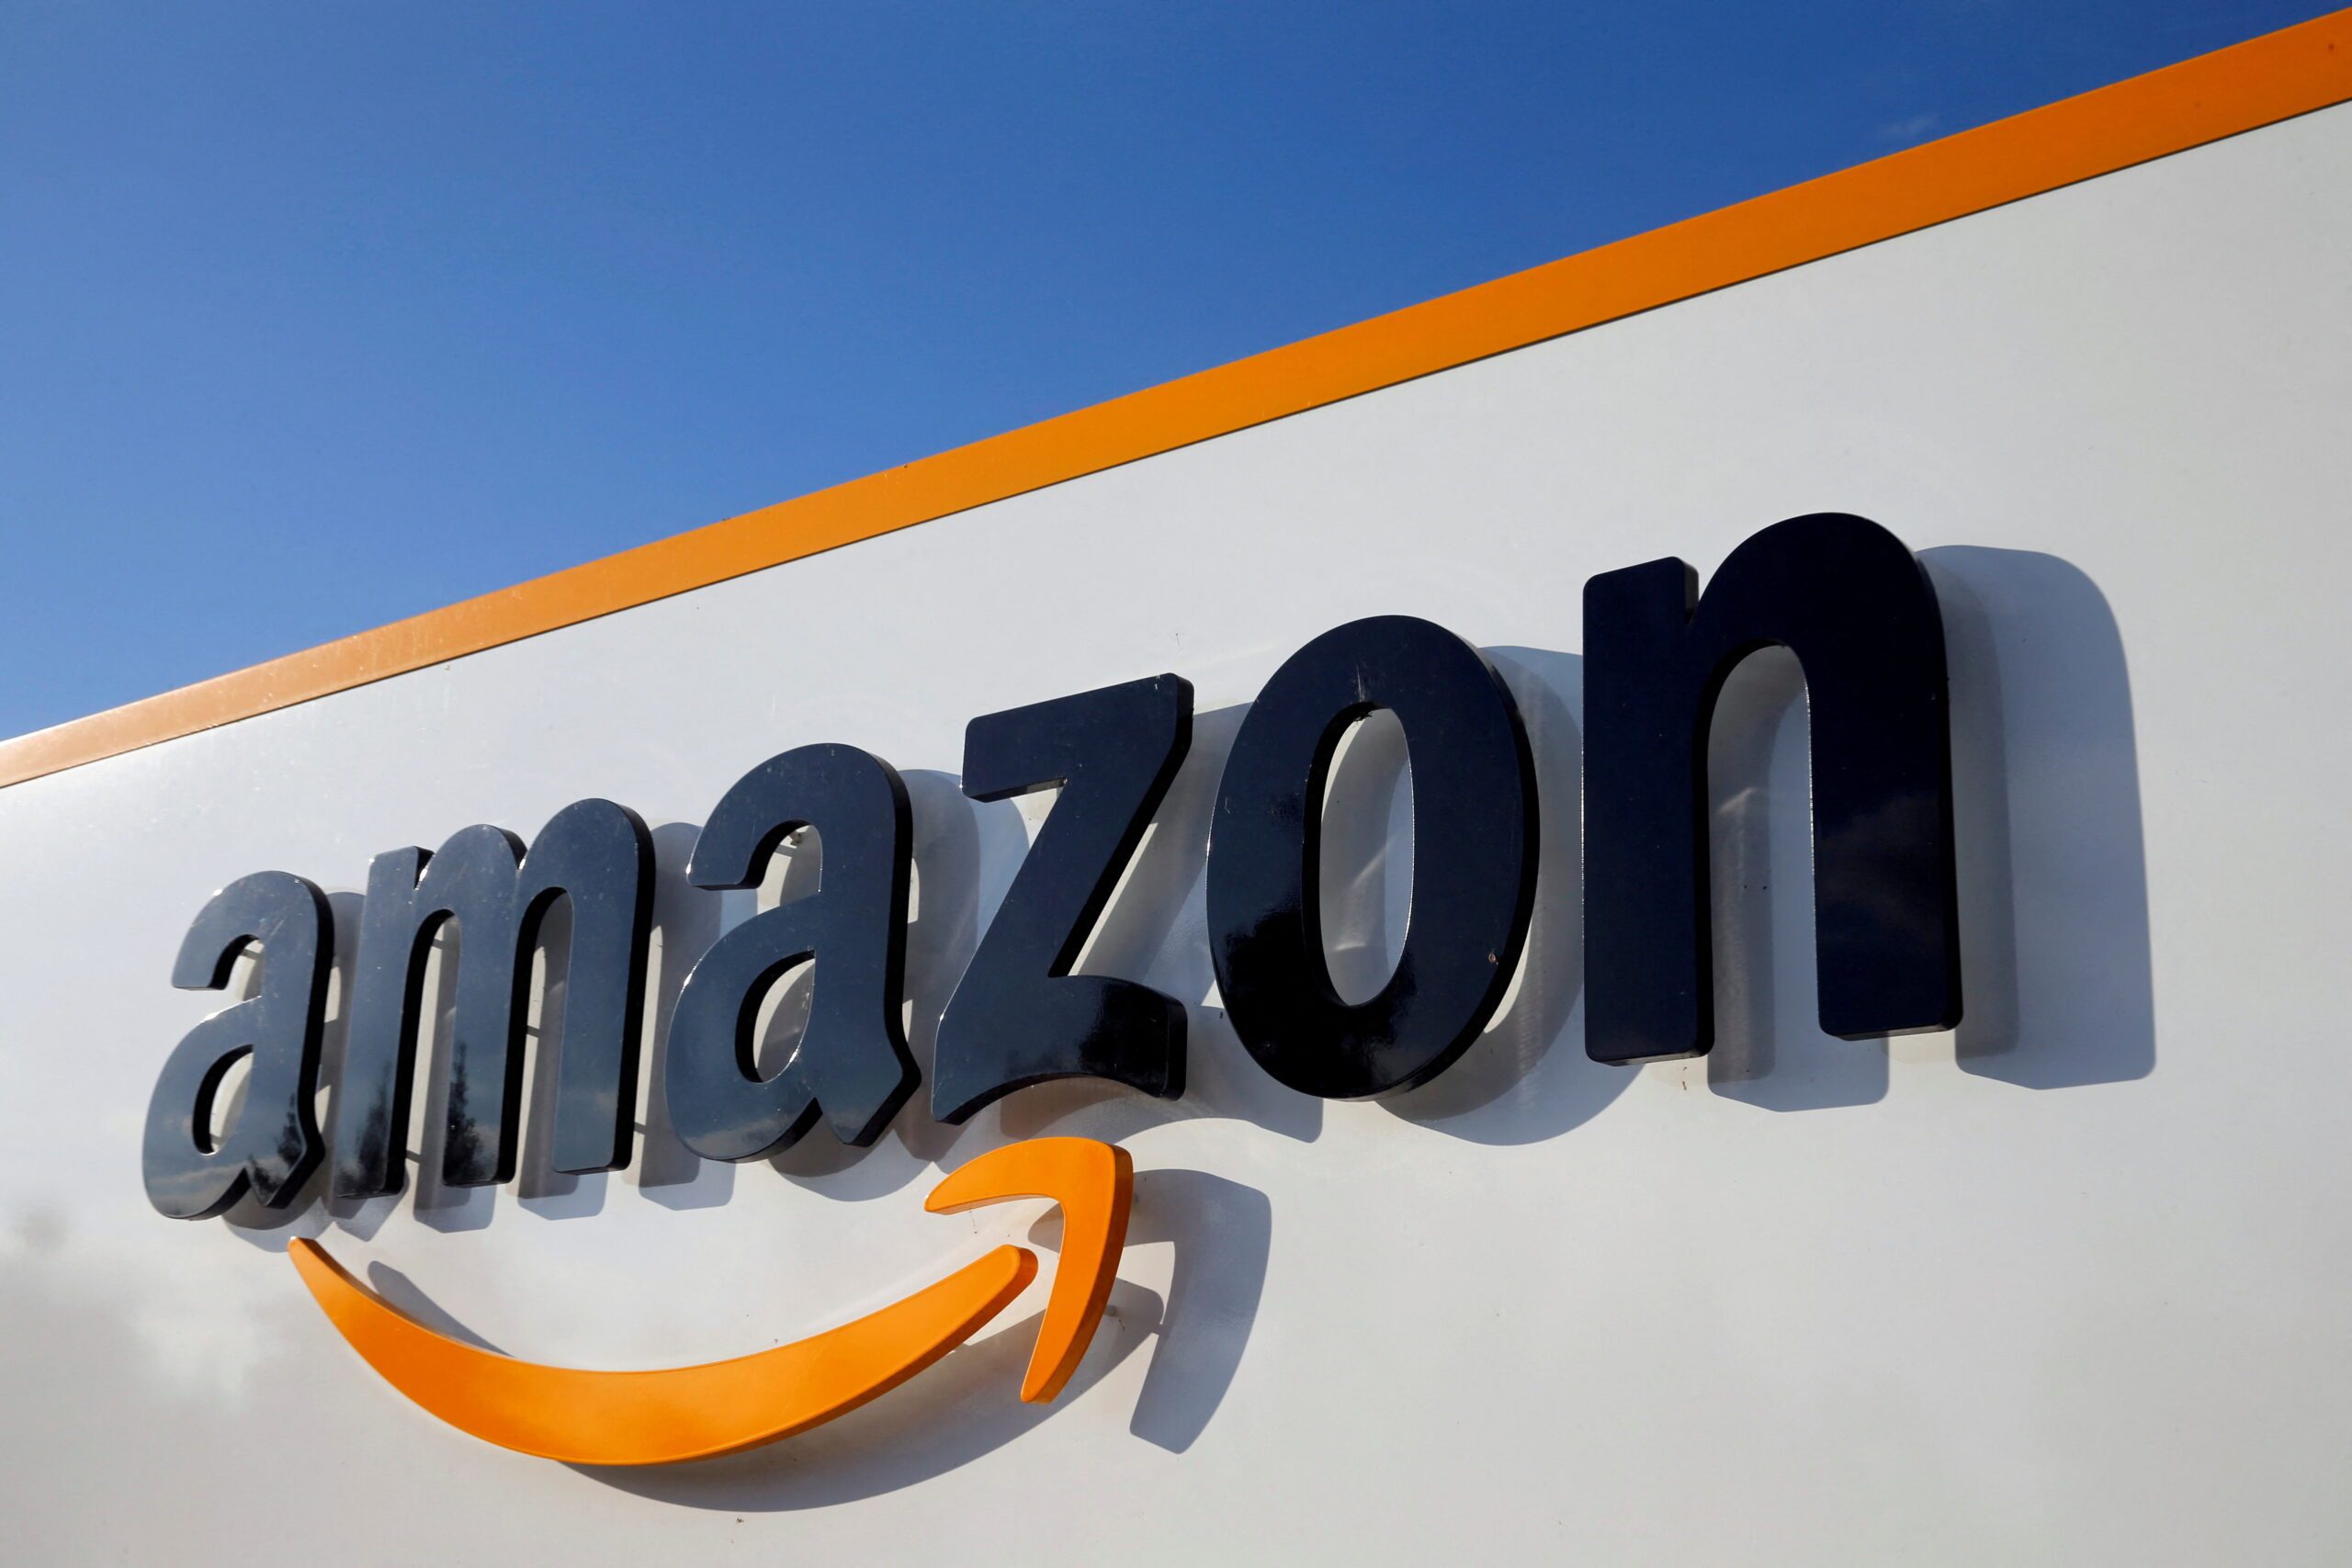 Amazon results and outlook fall short as warehouse, fuel costs soar